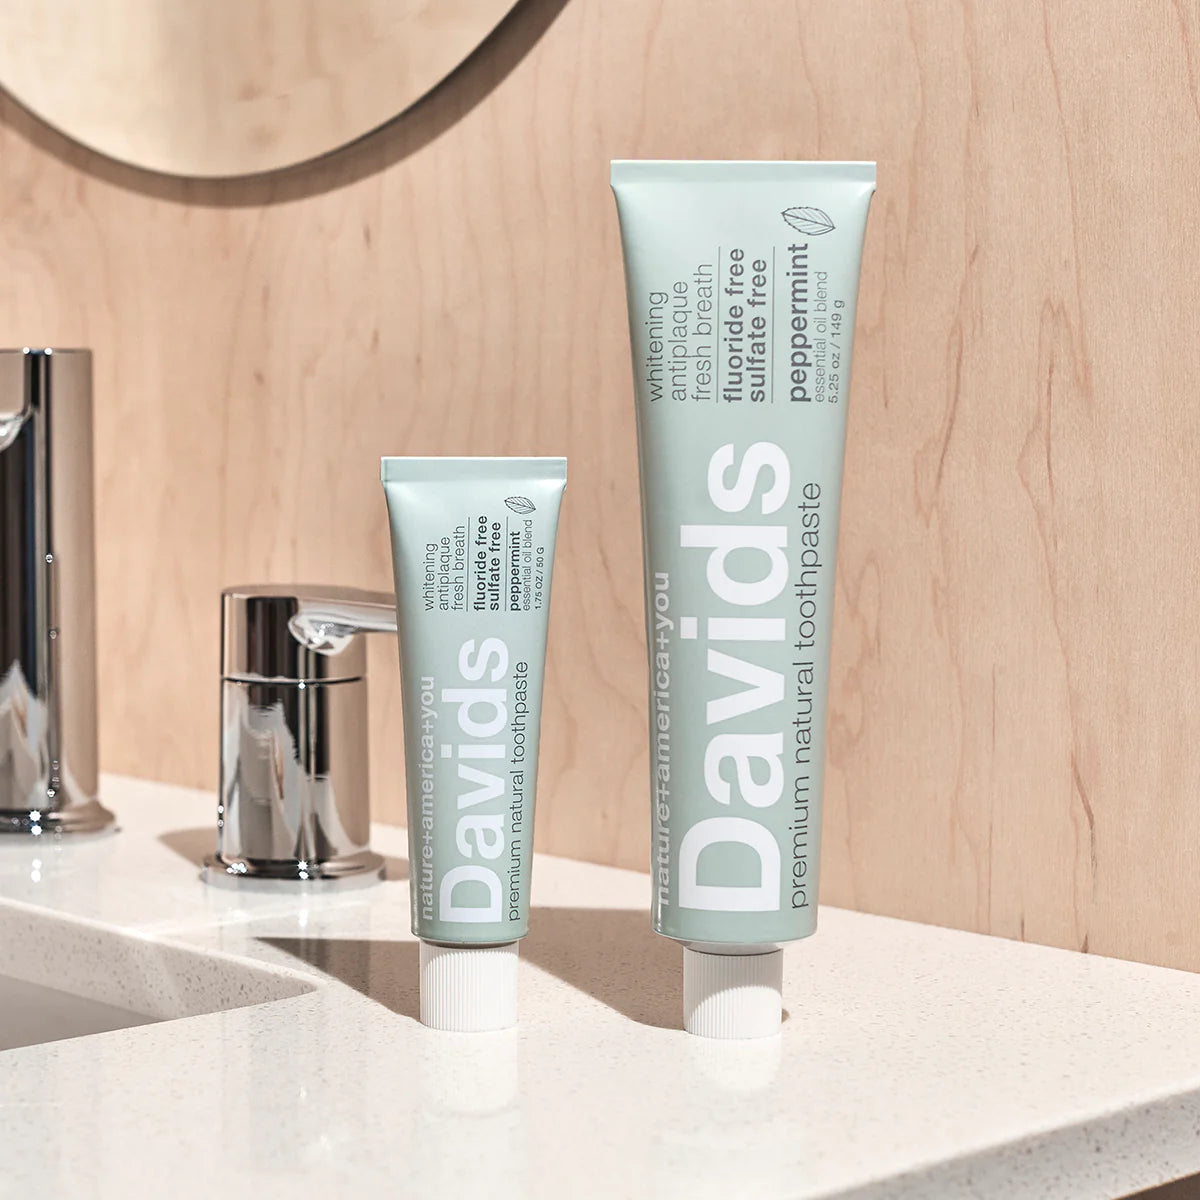 David's Travel Size Premium Natural Toothpaste - Peppermint